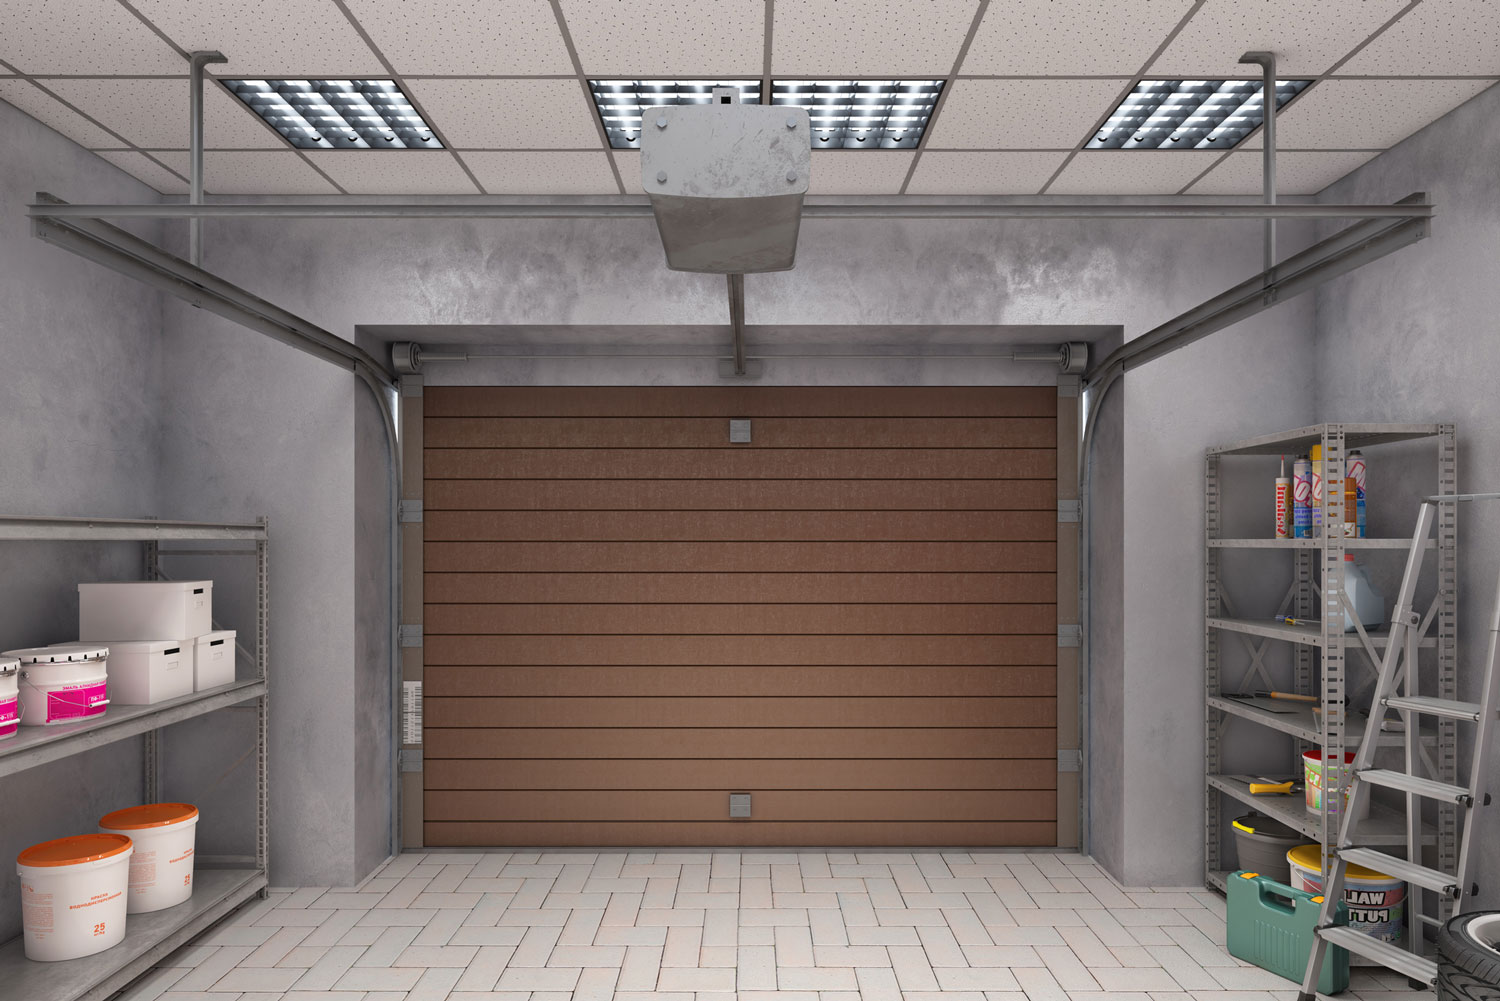 Does A Garage Ceiling Need Insulation, Does Insulating Garage Add Value